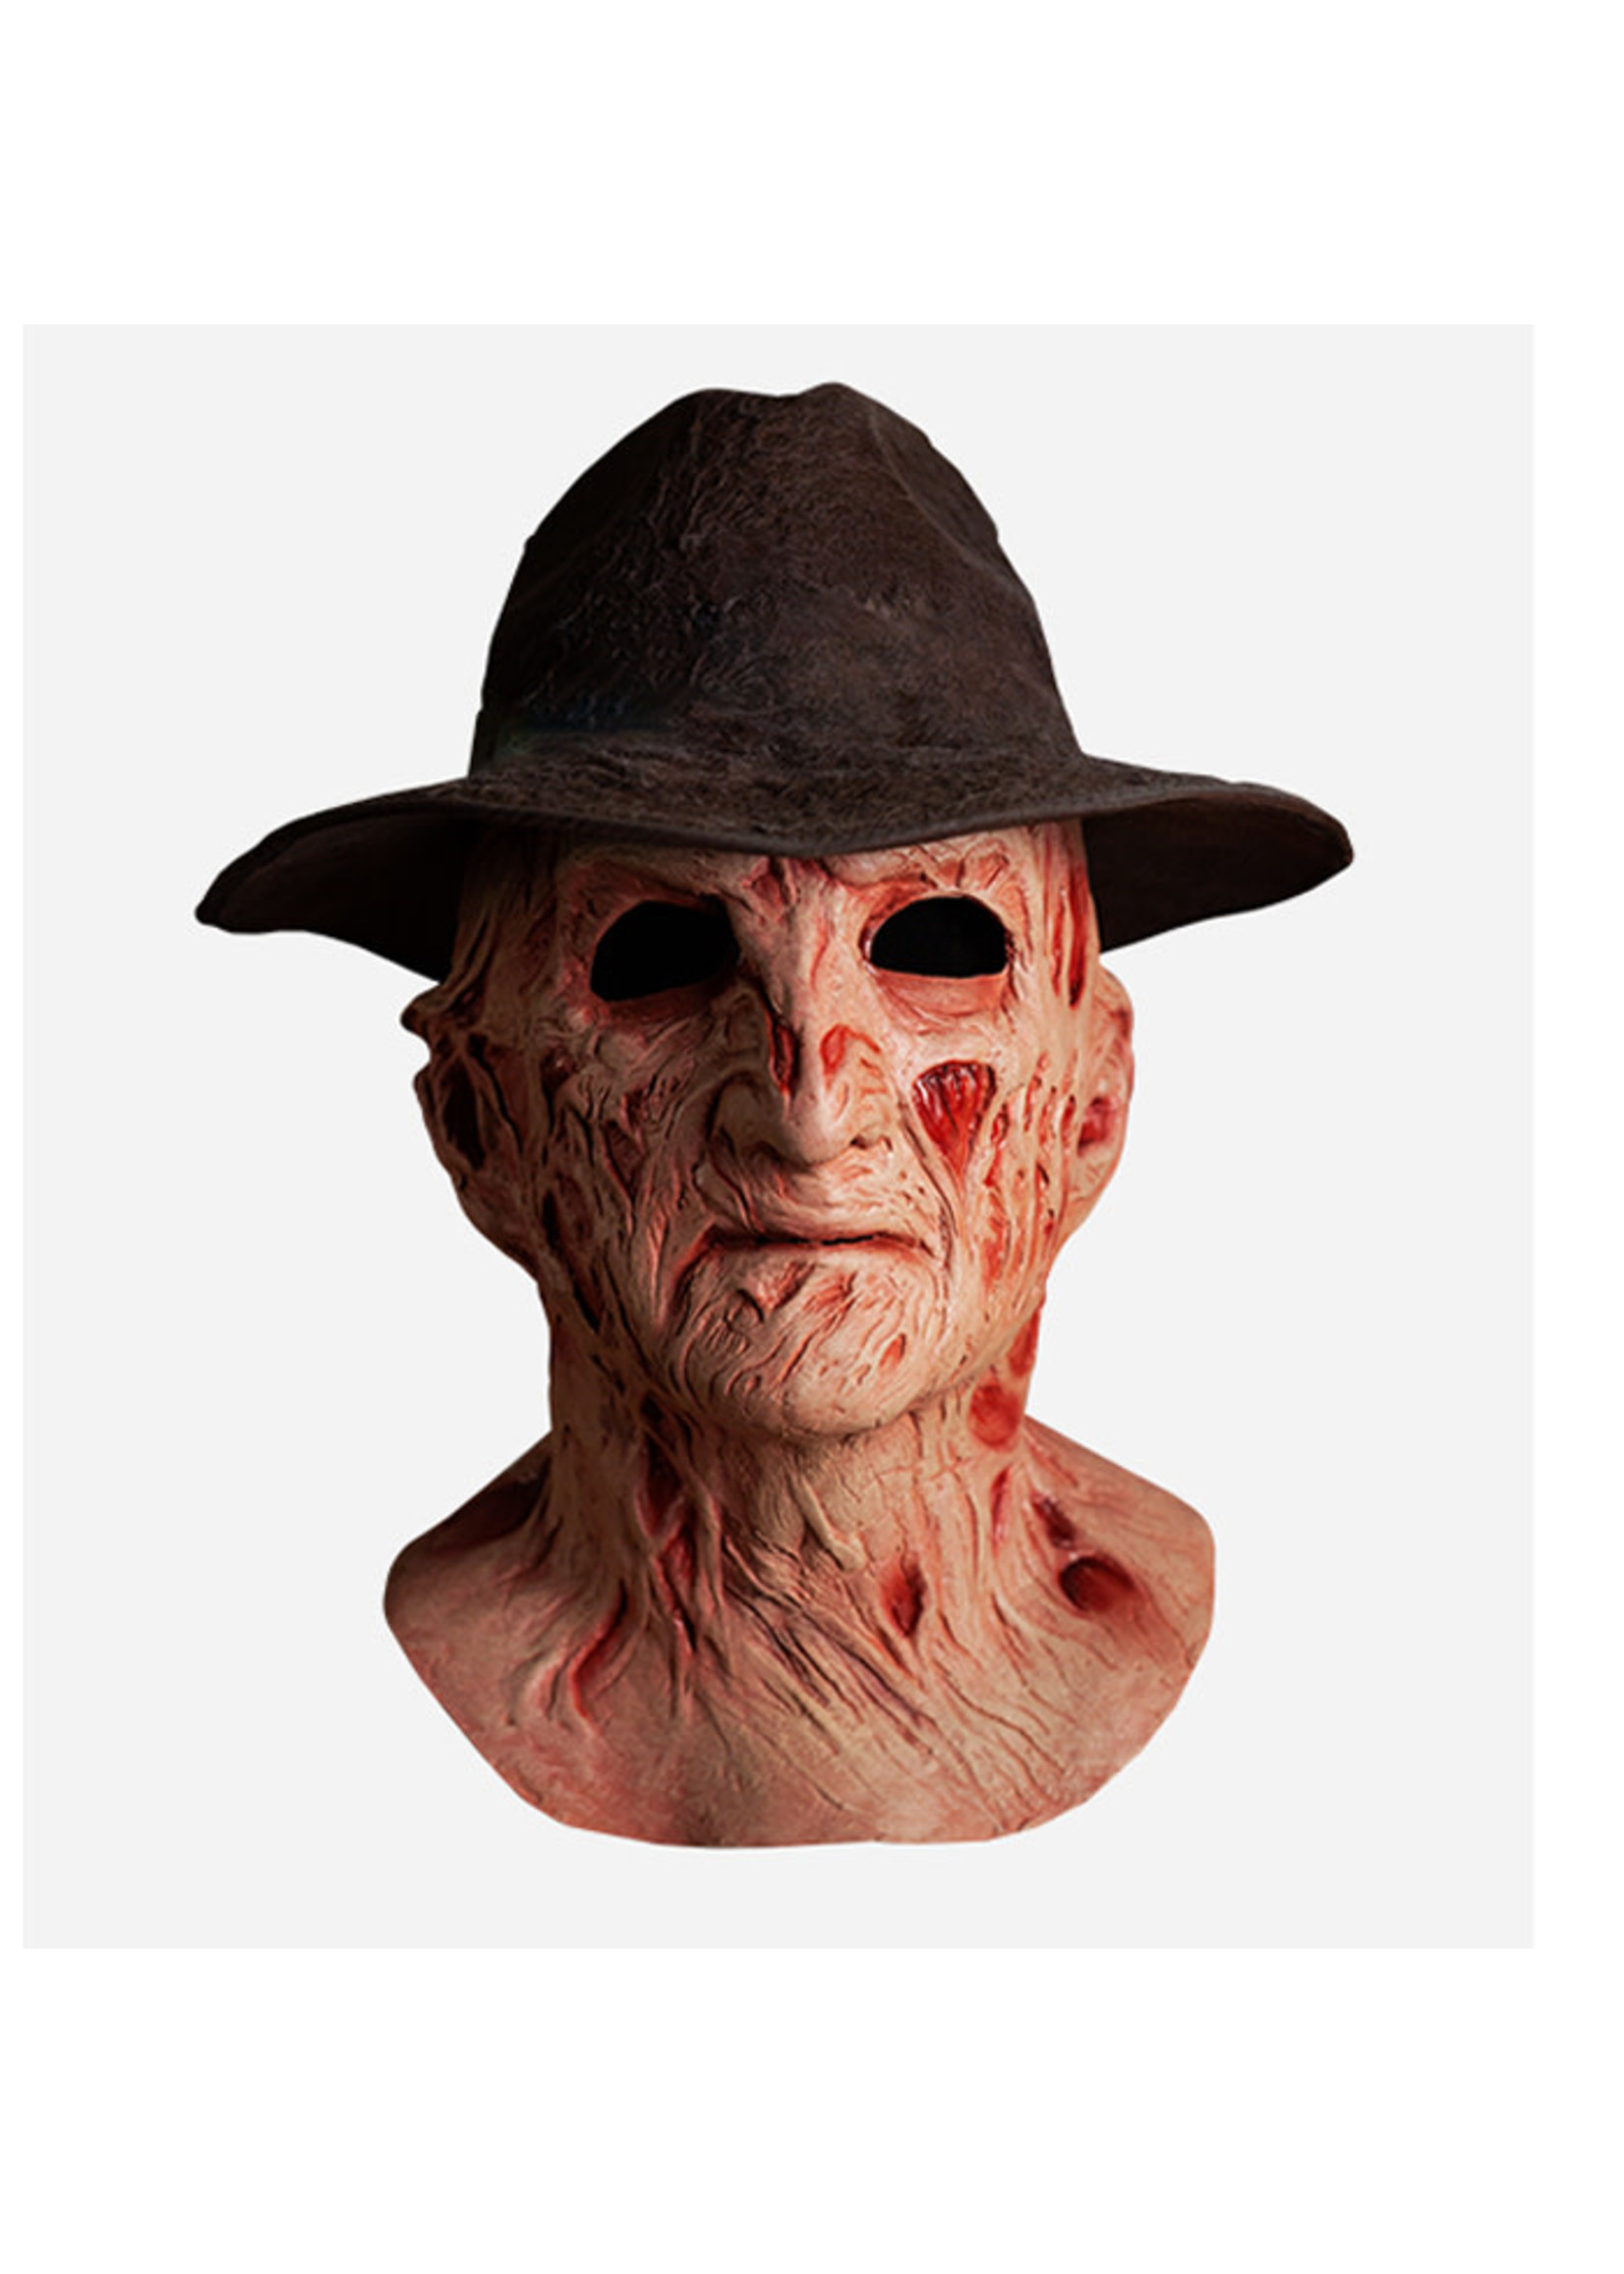 TRICK OR TREAT A Nightmare on Elm Street 4: The Dream Master-Deluxe Freddy Kruger Mask with Fedora Hat